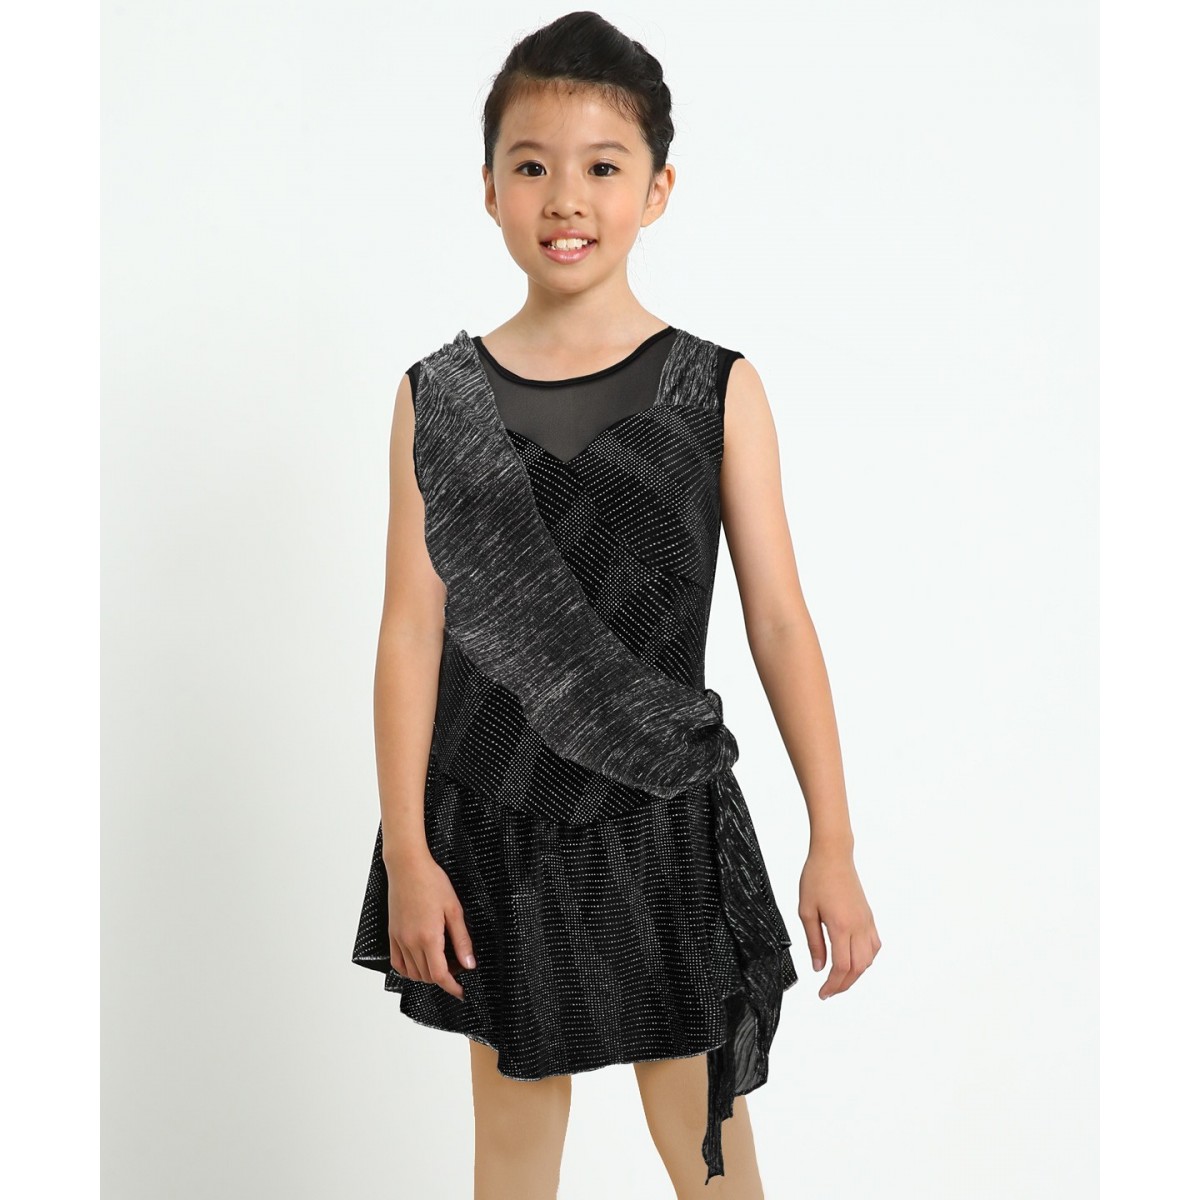 Details about   GK ICE FIGURE SKATE CAMISOLE ADULT SMALL MIDNIGHT AURORA FOIL PRINT DRESS AS NWT 